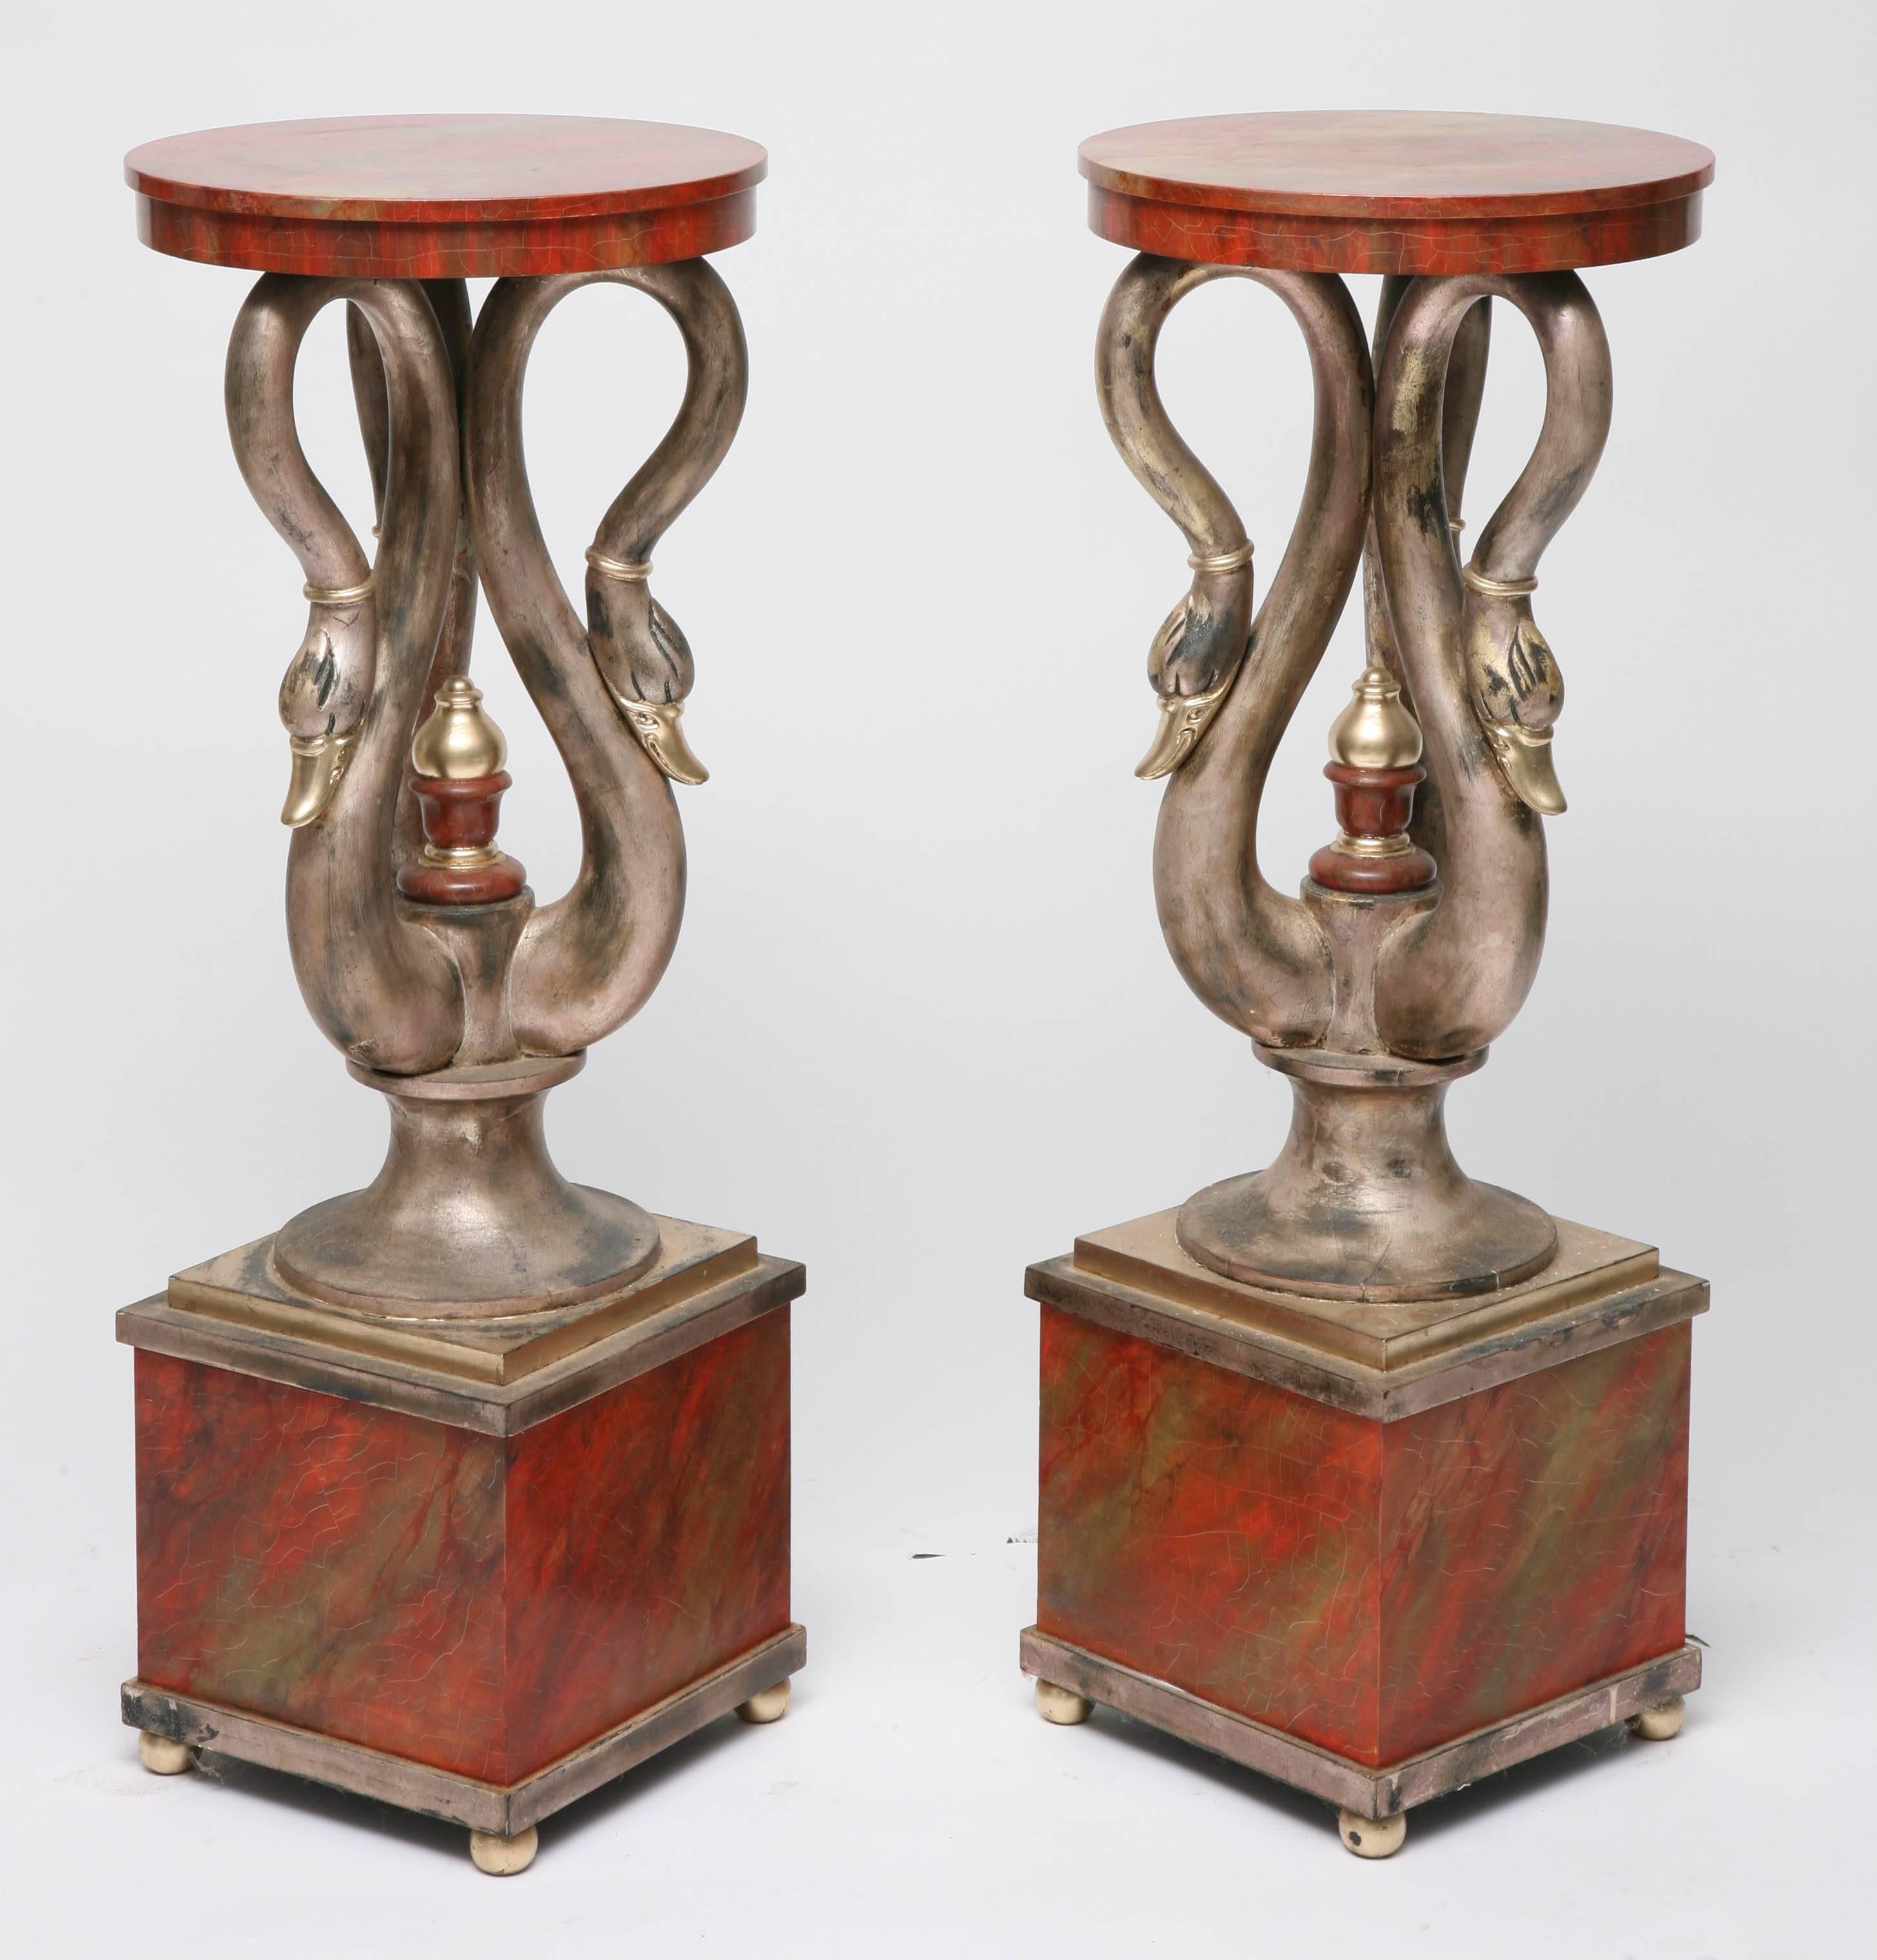 American Pair of Neoclassical, French Empire Style Swan Pedestals, Isabel O'neil Studio